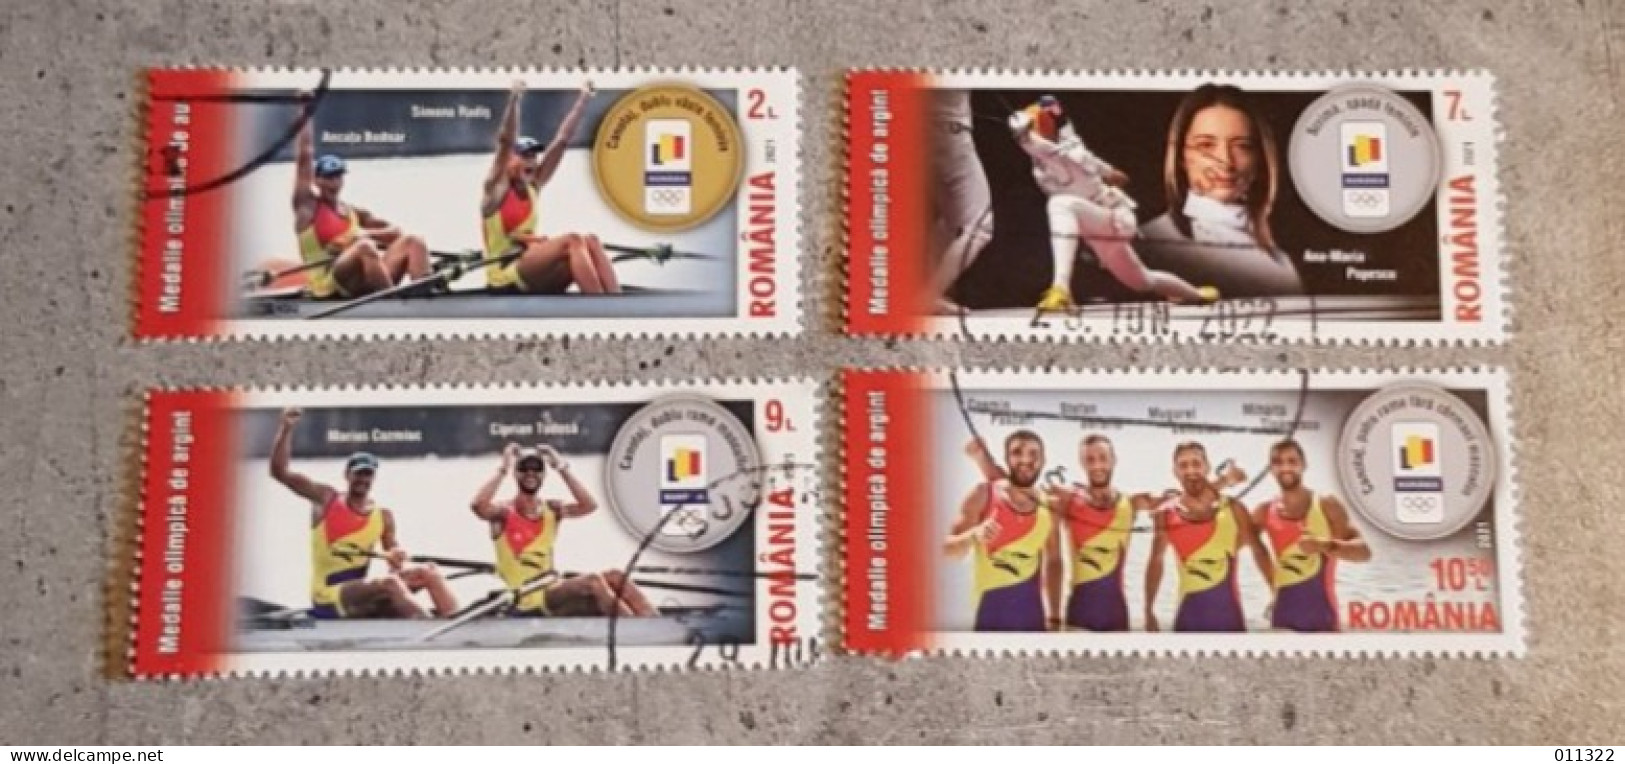 ROMANIA OLYMPIC SET USED - Used Stamps